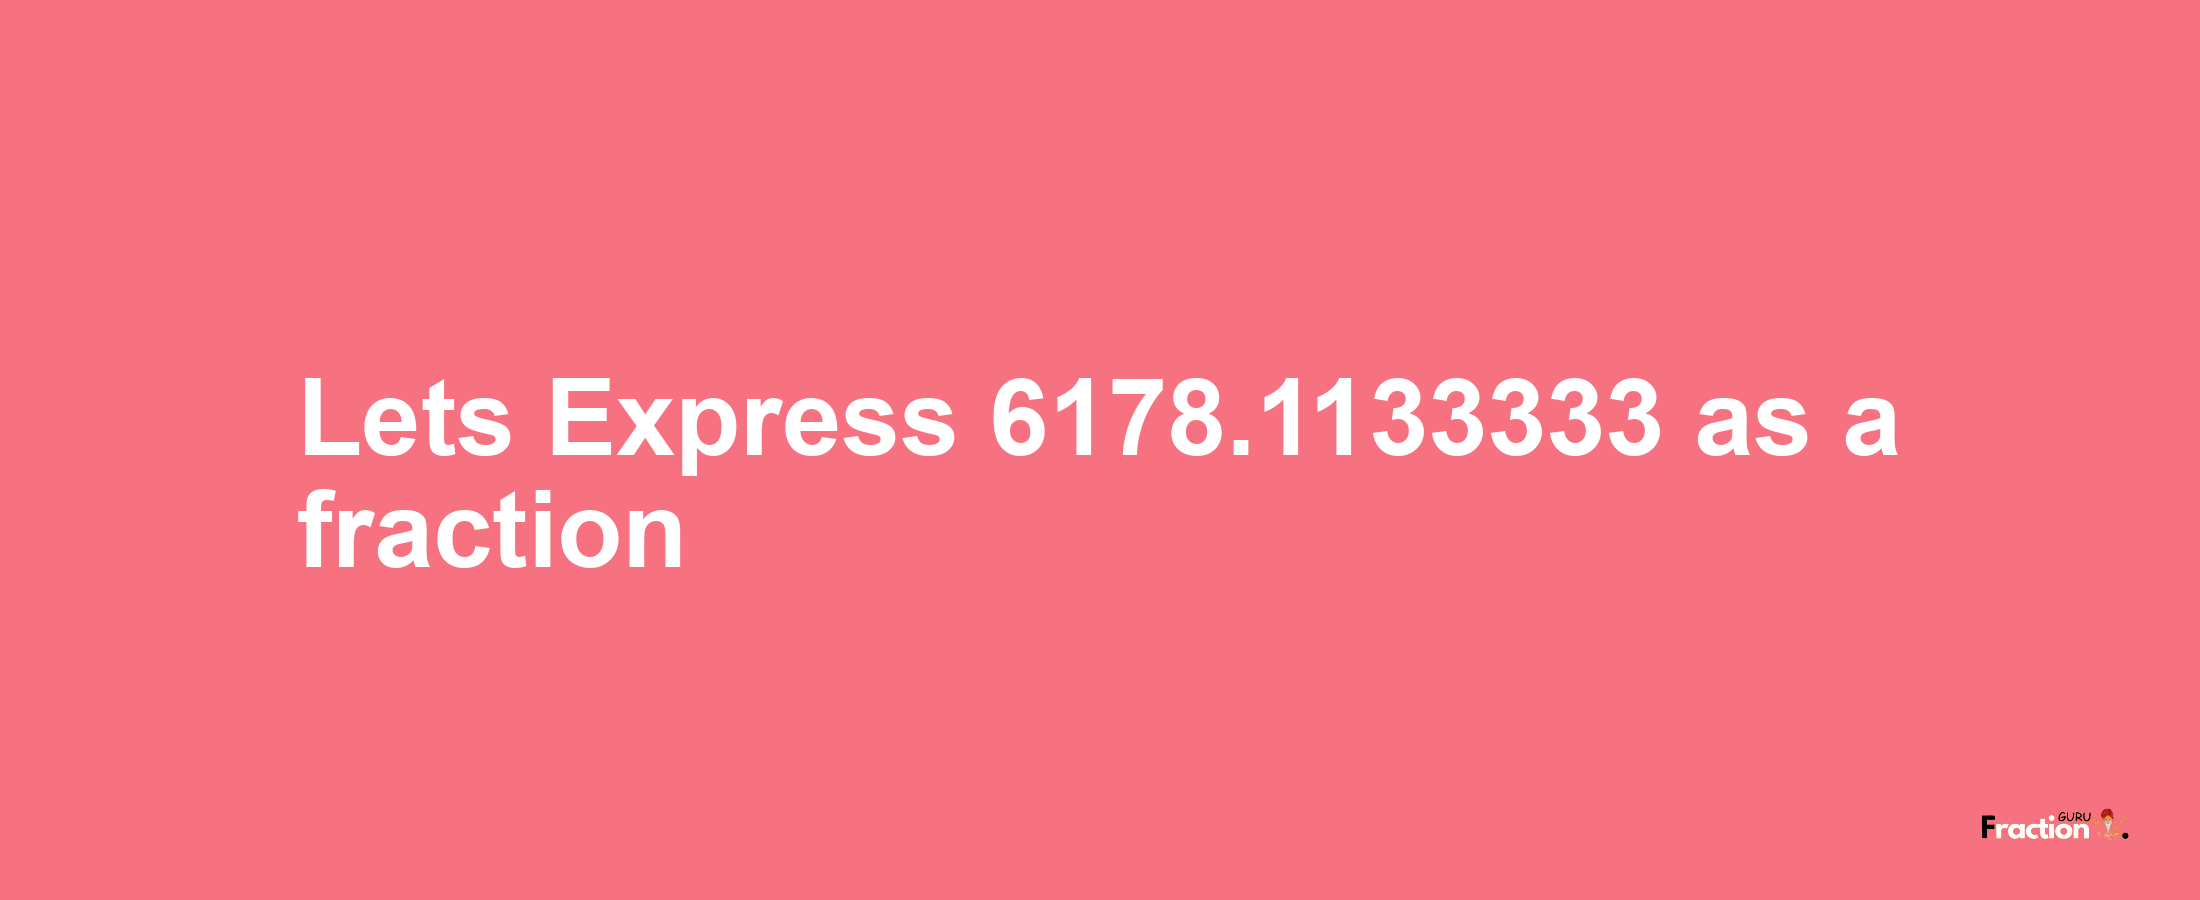 Lets Express 6178.1133333 as afraction